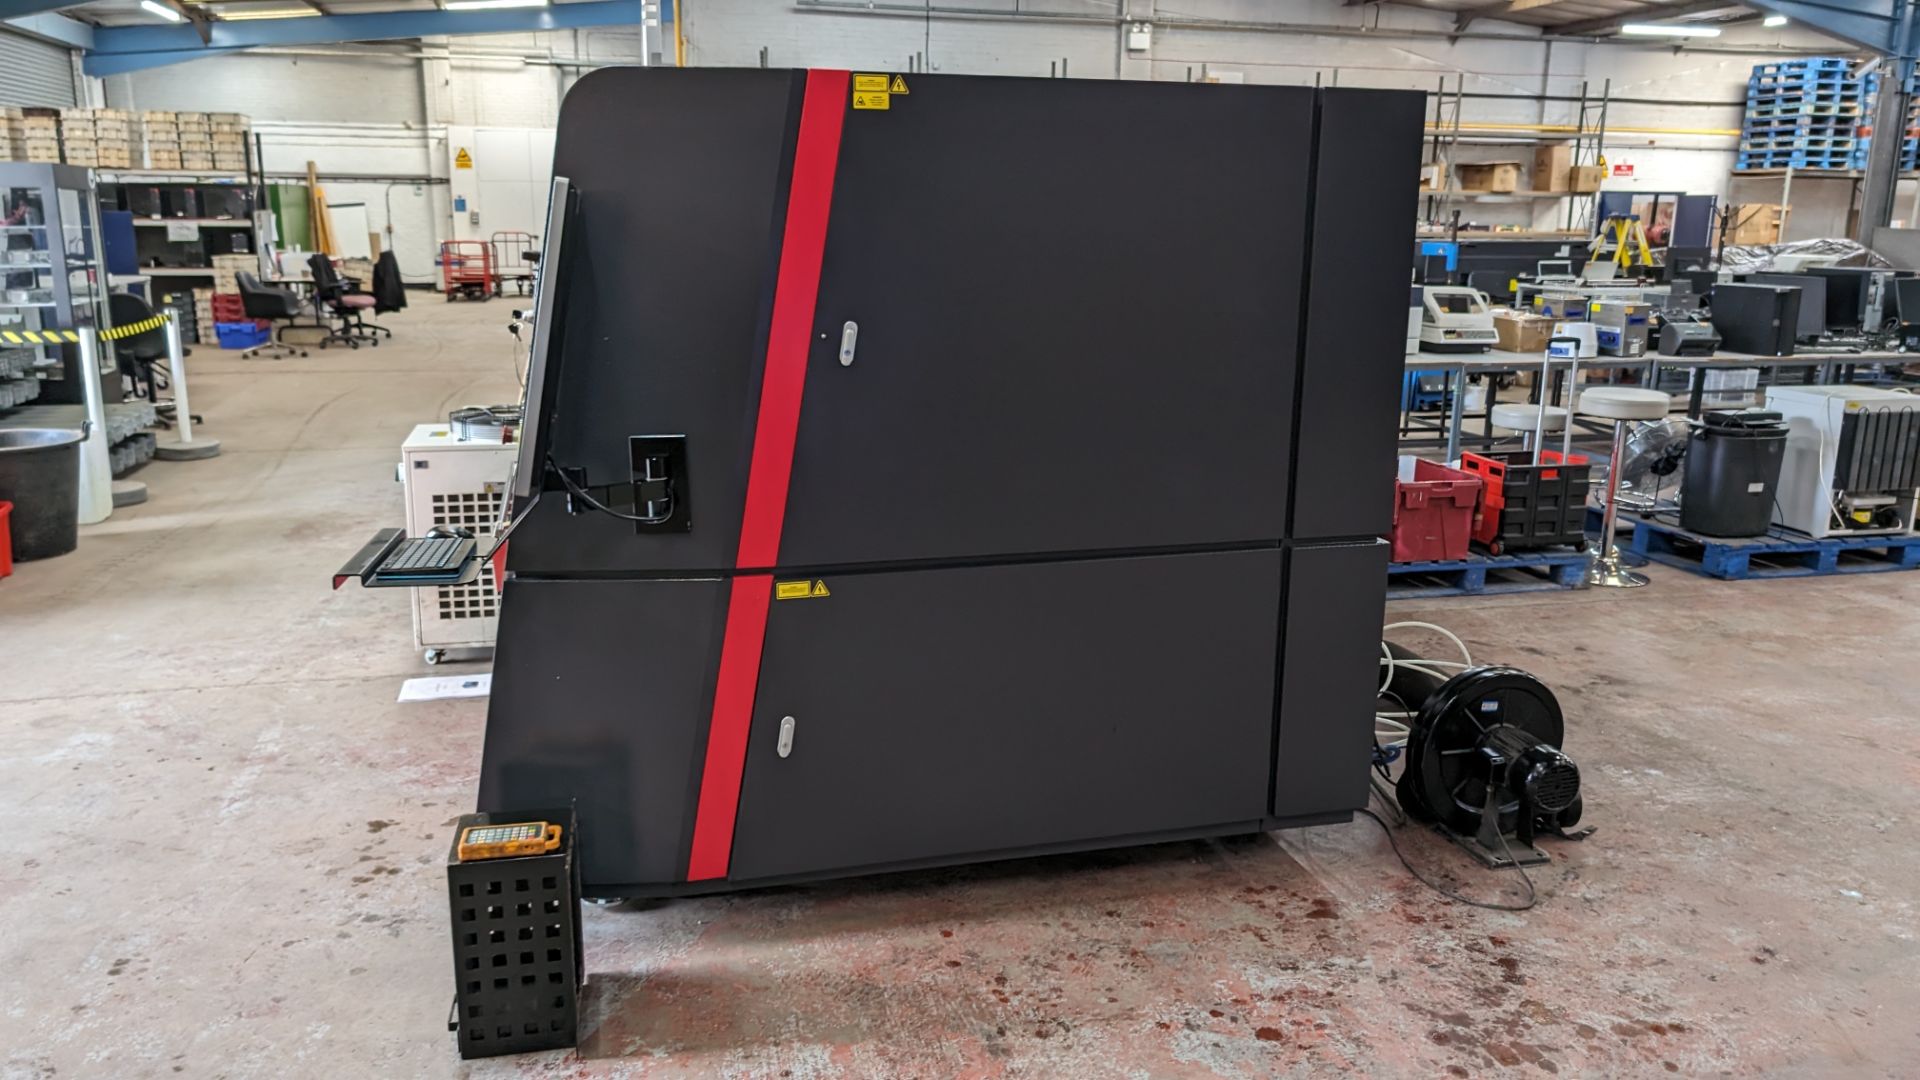 2021 HPC LS1390 1000W IPG fibre laser cutting machine. Includes external chiller. Includes extractio - Image 4 of 41